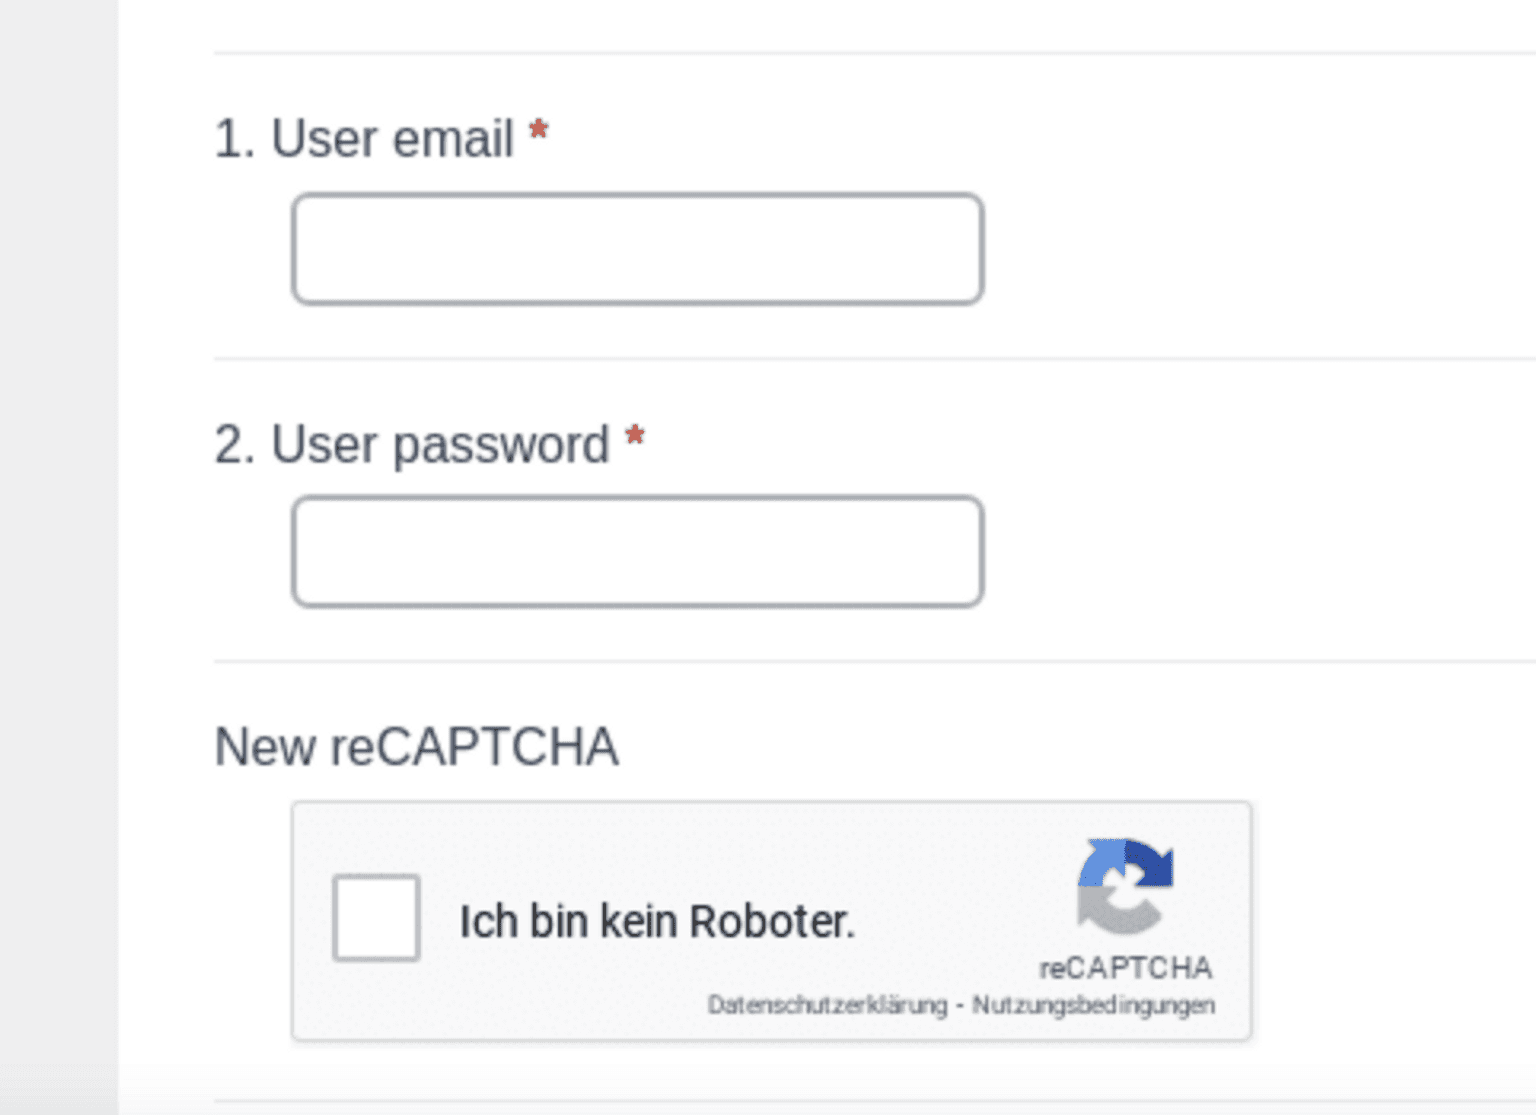 Login page with recaptcha from Quishing attack